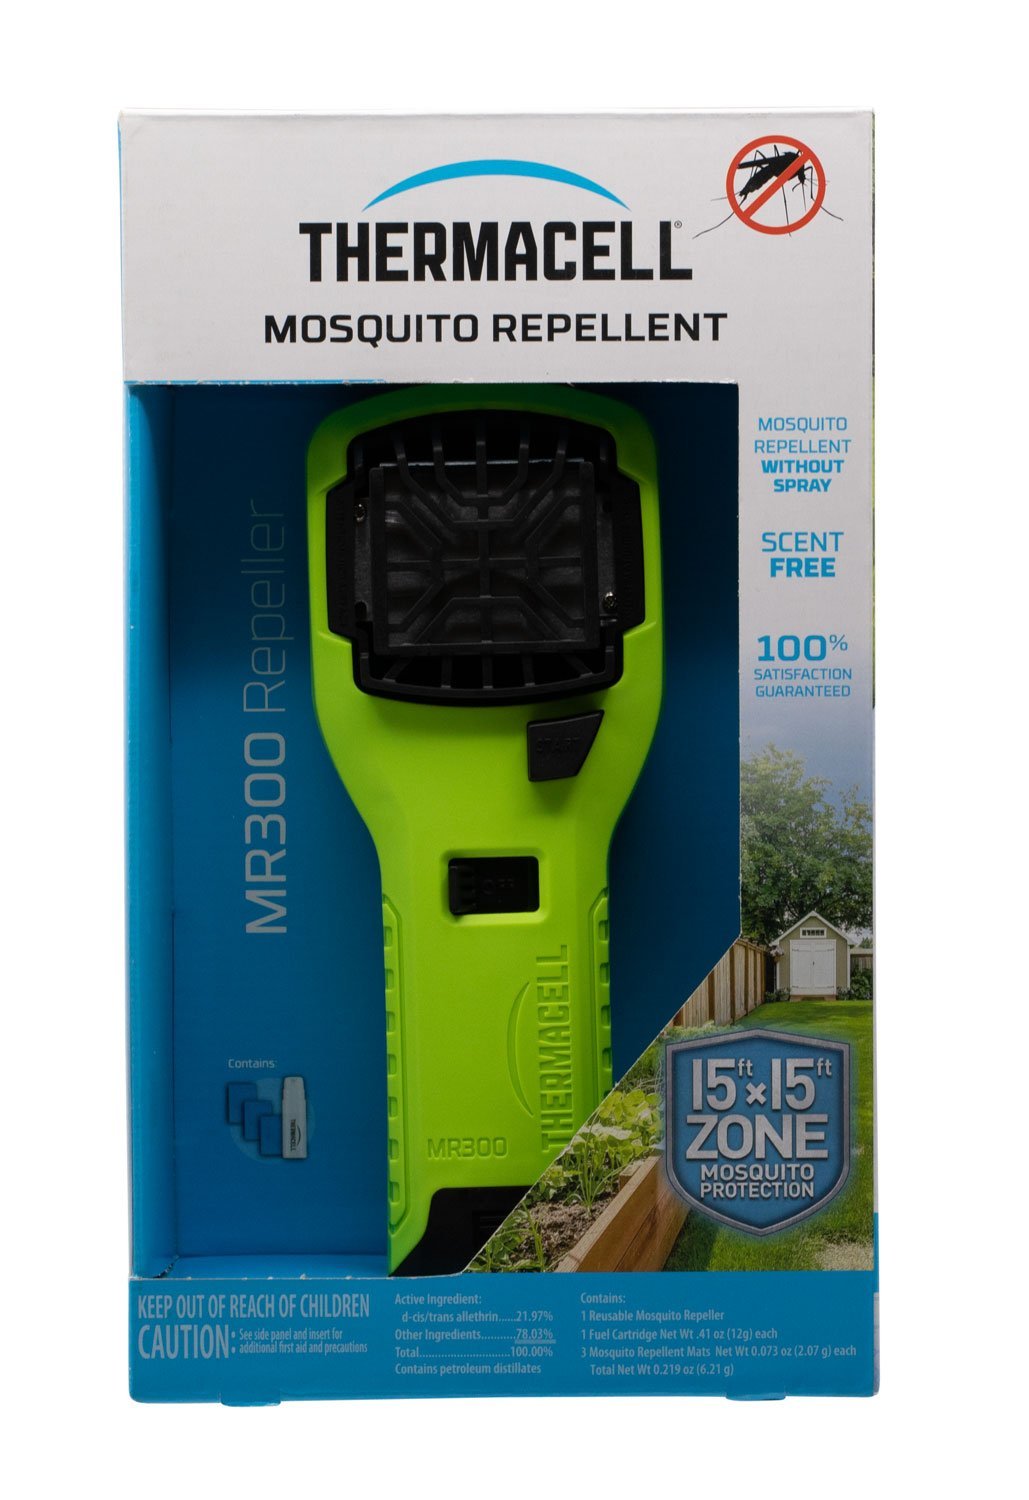 Thermacell MR300 Portable Repeller Yellow Effective 15 ft Odorless Repellent Effective Up to 12 hrs - Pacific Flyway Supplies